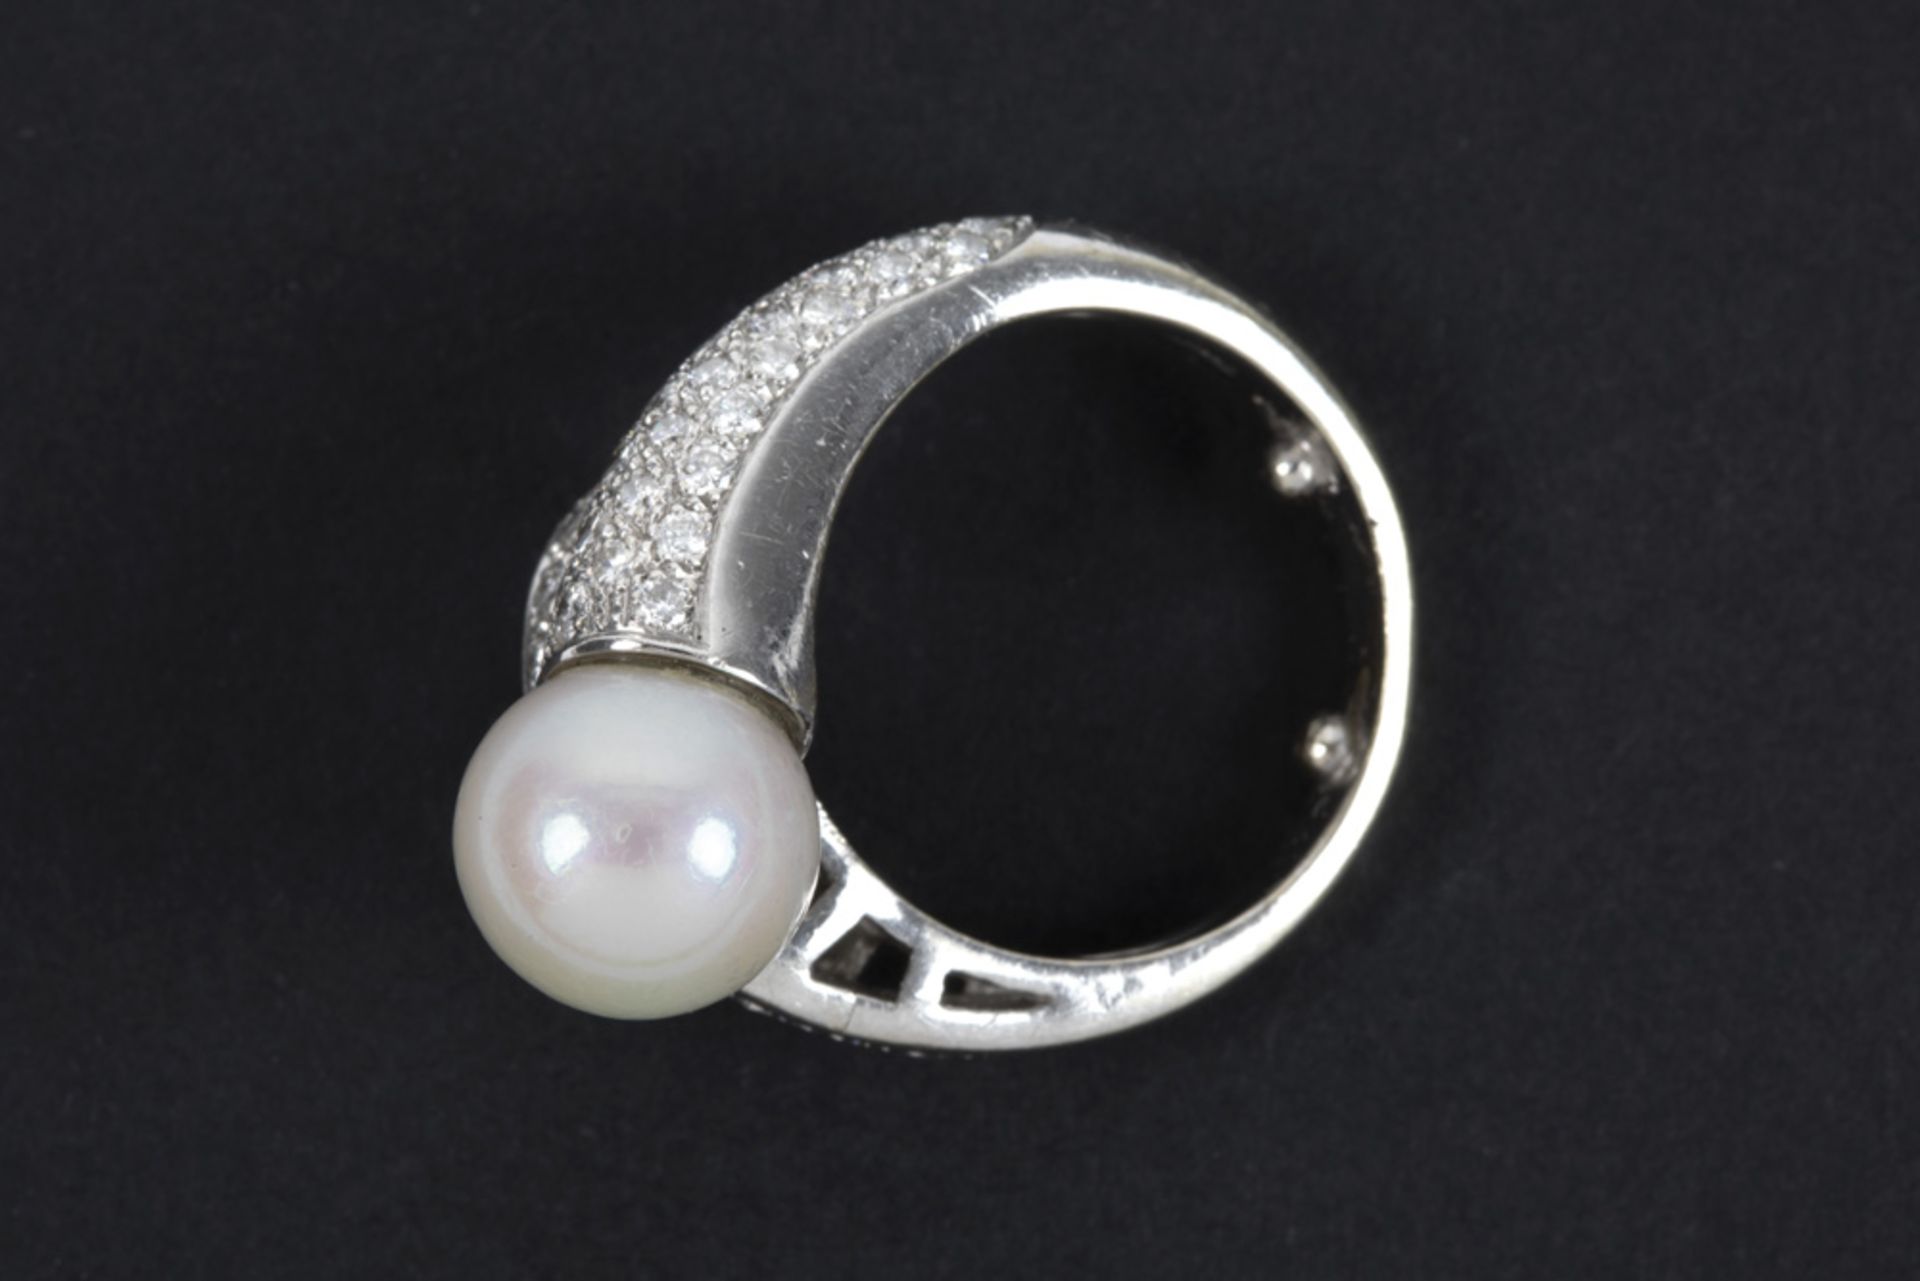 ring in white gold (18 carat) with a snake design with a white pearl as the head and ca 1,20 carat - Image 2 of 3